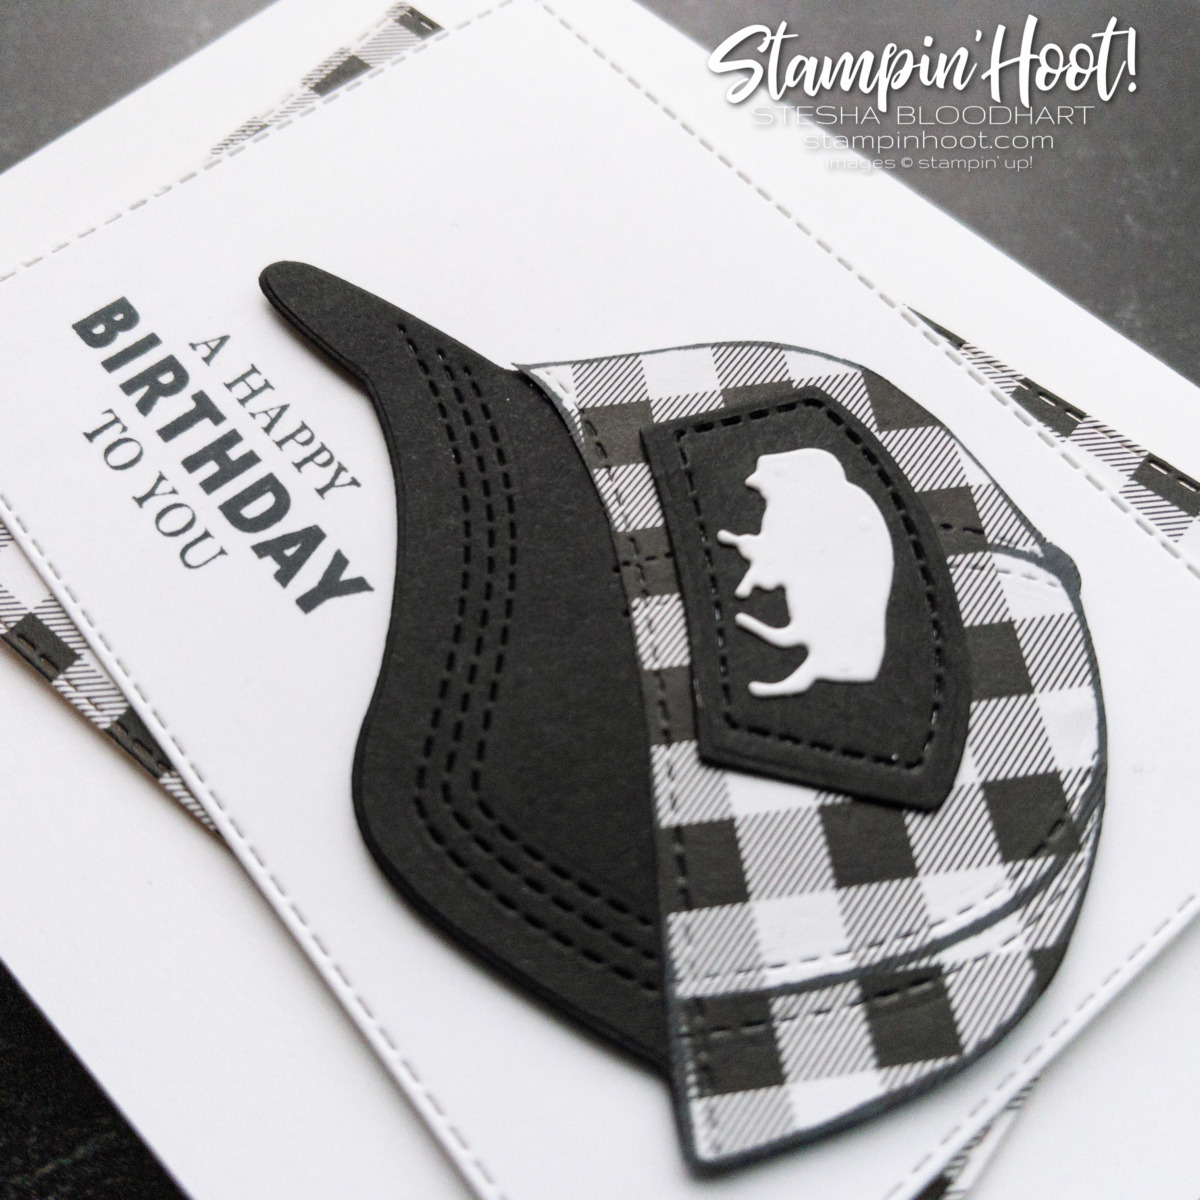 Create this masculine birthday card using the Hat Builder Dies and Pattern Party DSP. Stesha Bloodhart, Stampin' Hoot!